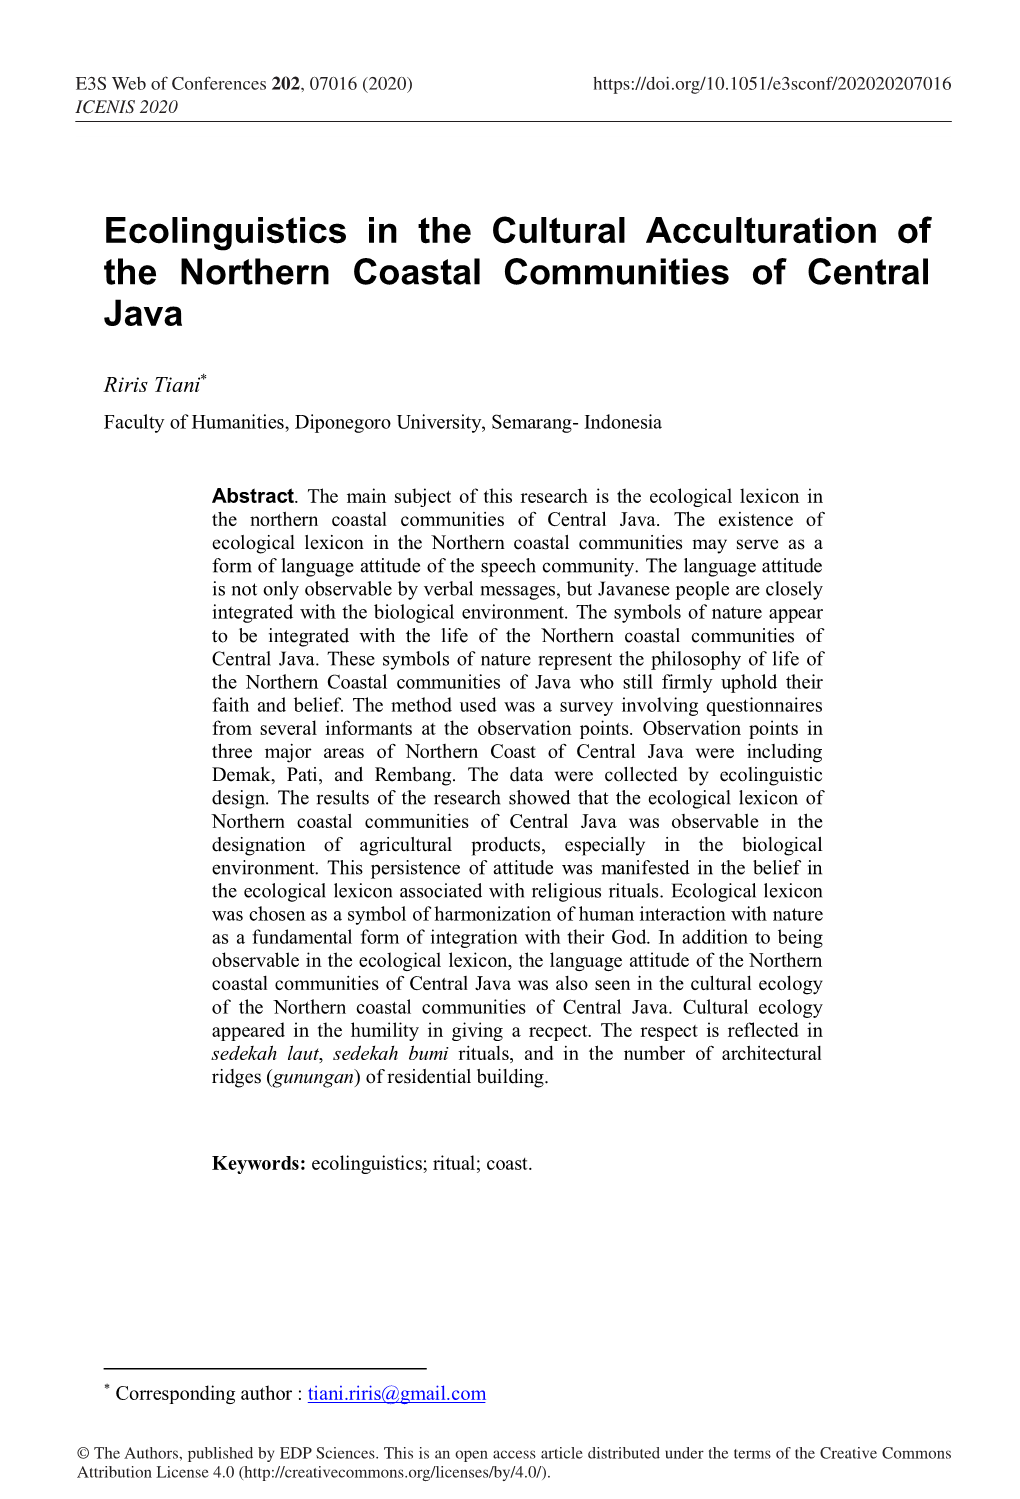 Ecolinguistics in the Cultural Acculturation of the Northern Coastal Communities of Central Java